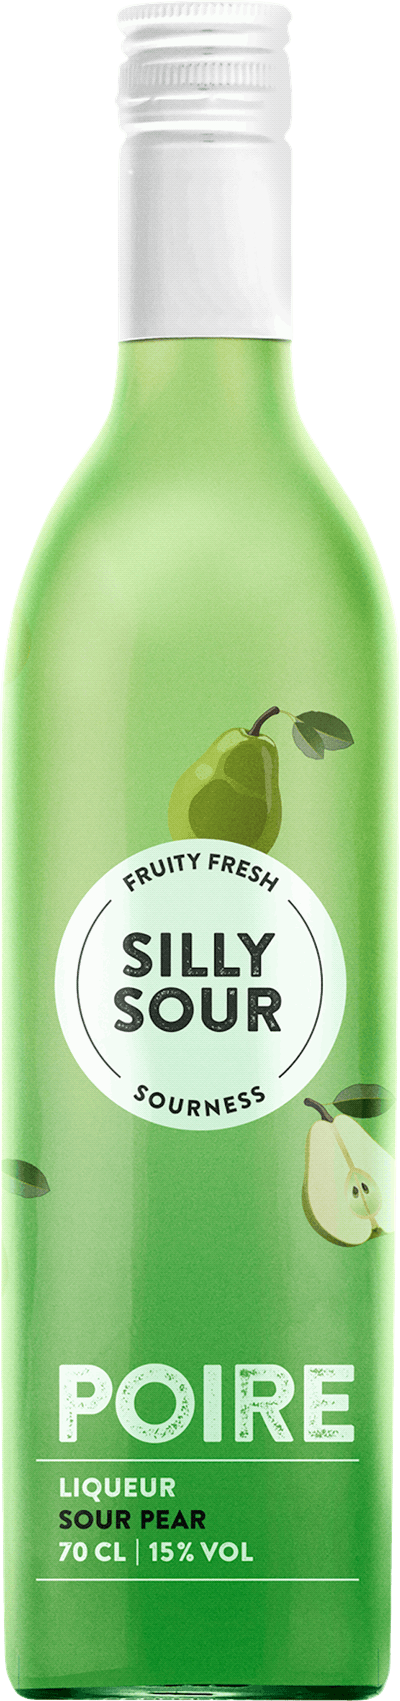 Silly Sour Pear